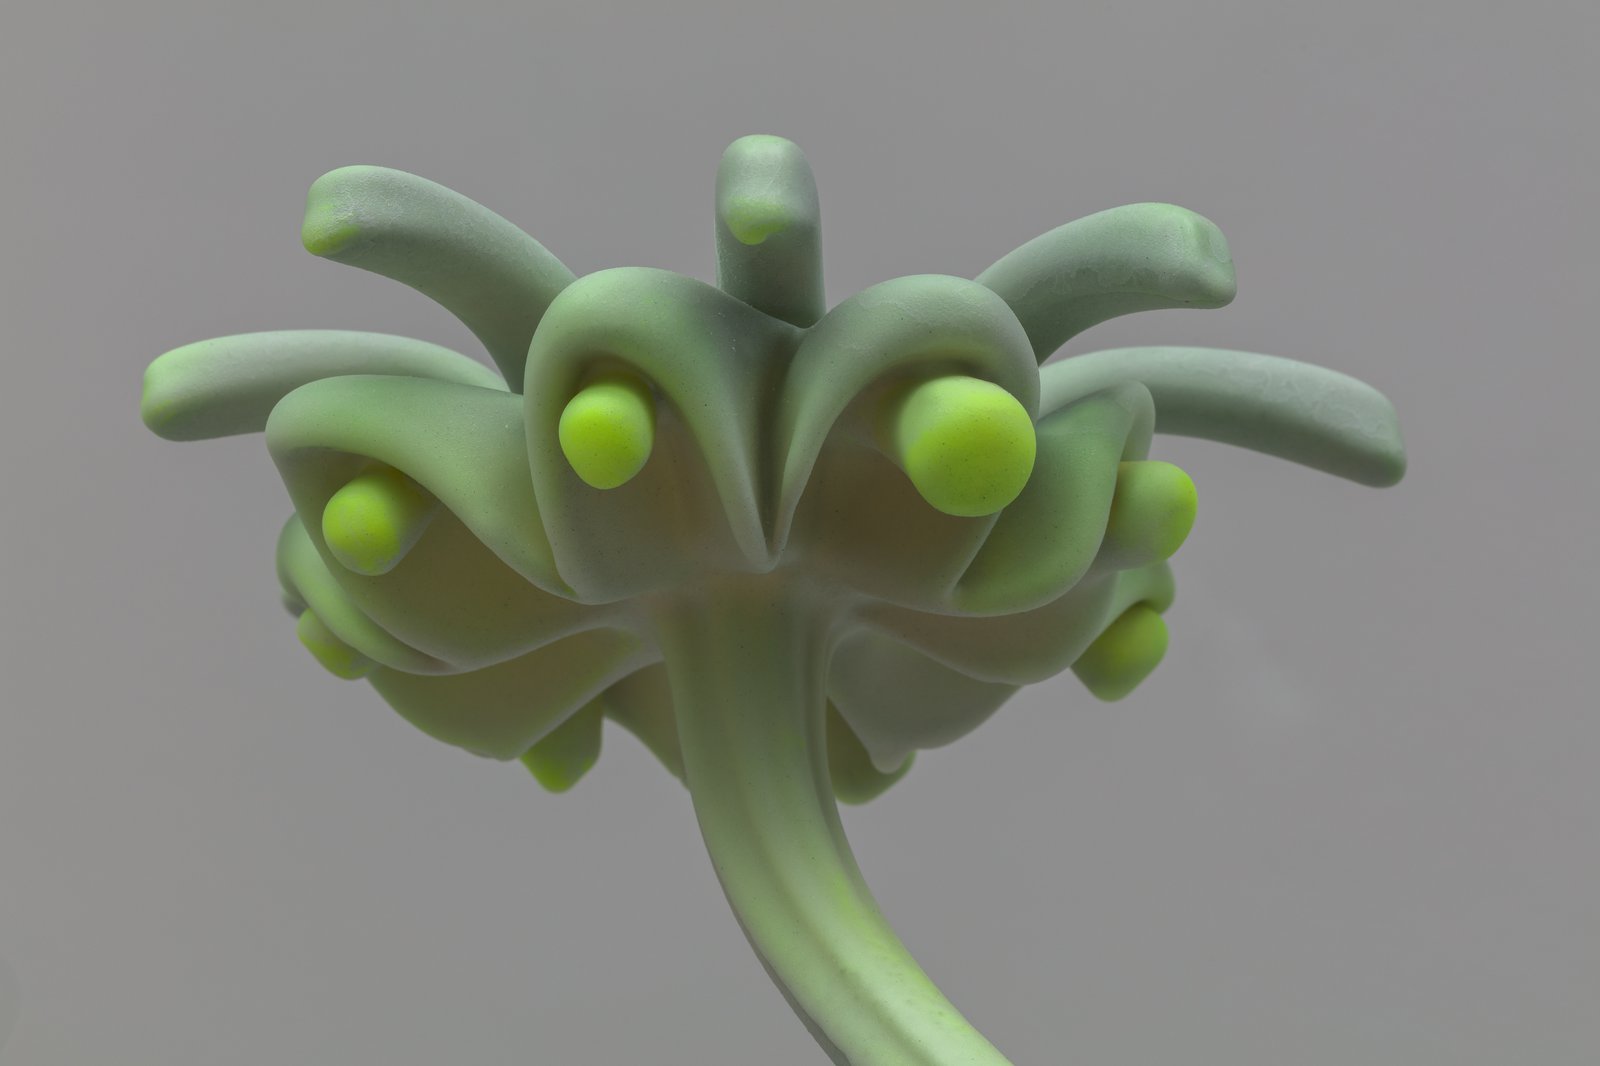 Marguerite Humeau, Marchantia, 2022, detail view.Wax, sugars, mineral dust, glass, natural extracts, pigments, thermochromic pigments, plant-based and synthetic resin, nylon, bronze, work: 56 x 86.5 x 48.5 cm; overall: 151 x 86.5 x 48.5 cmCourtesy of the artist and CLEARING